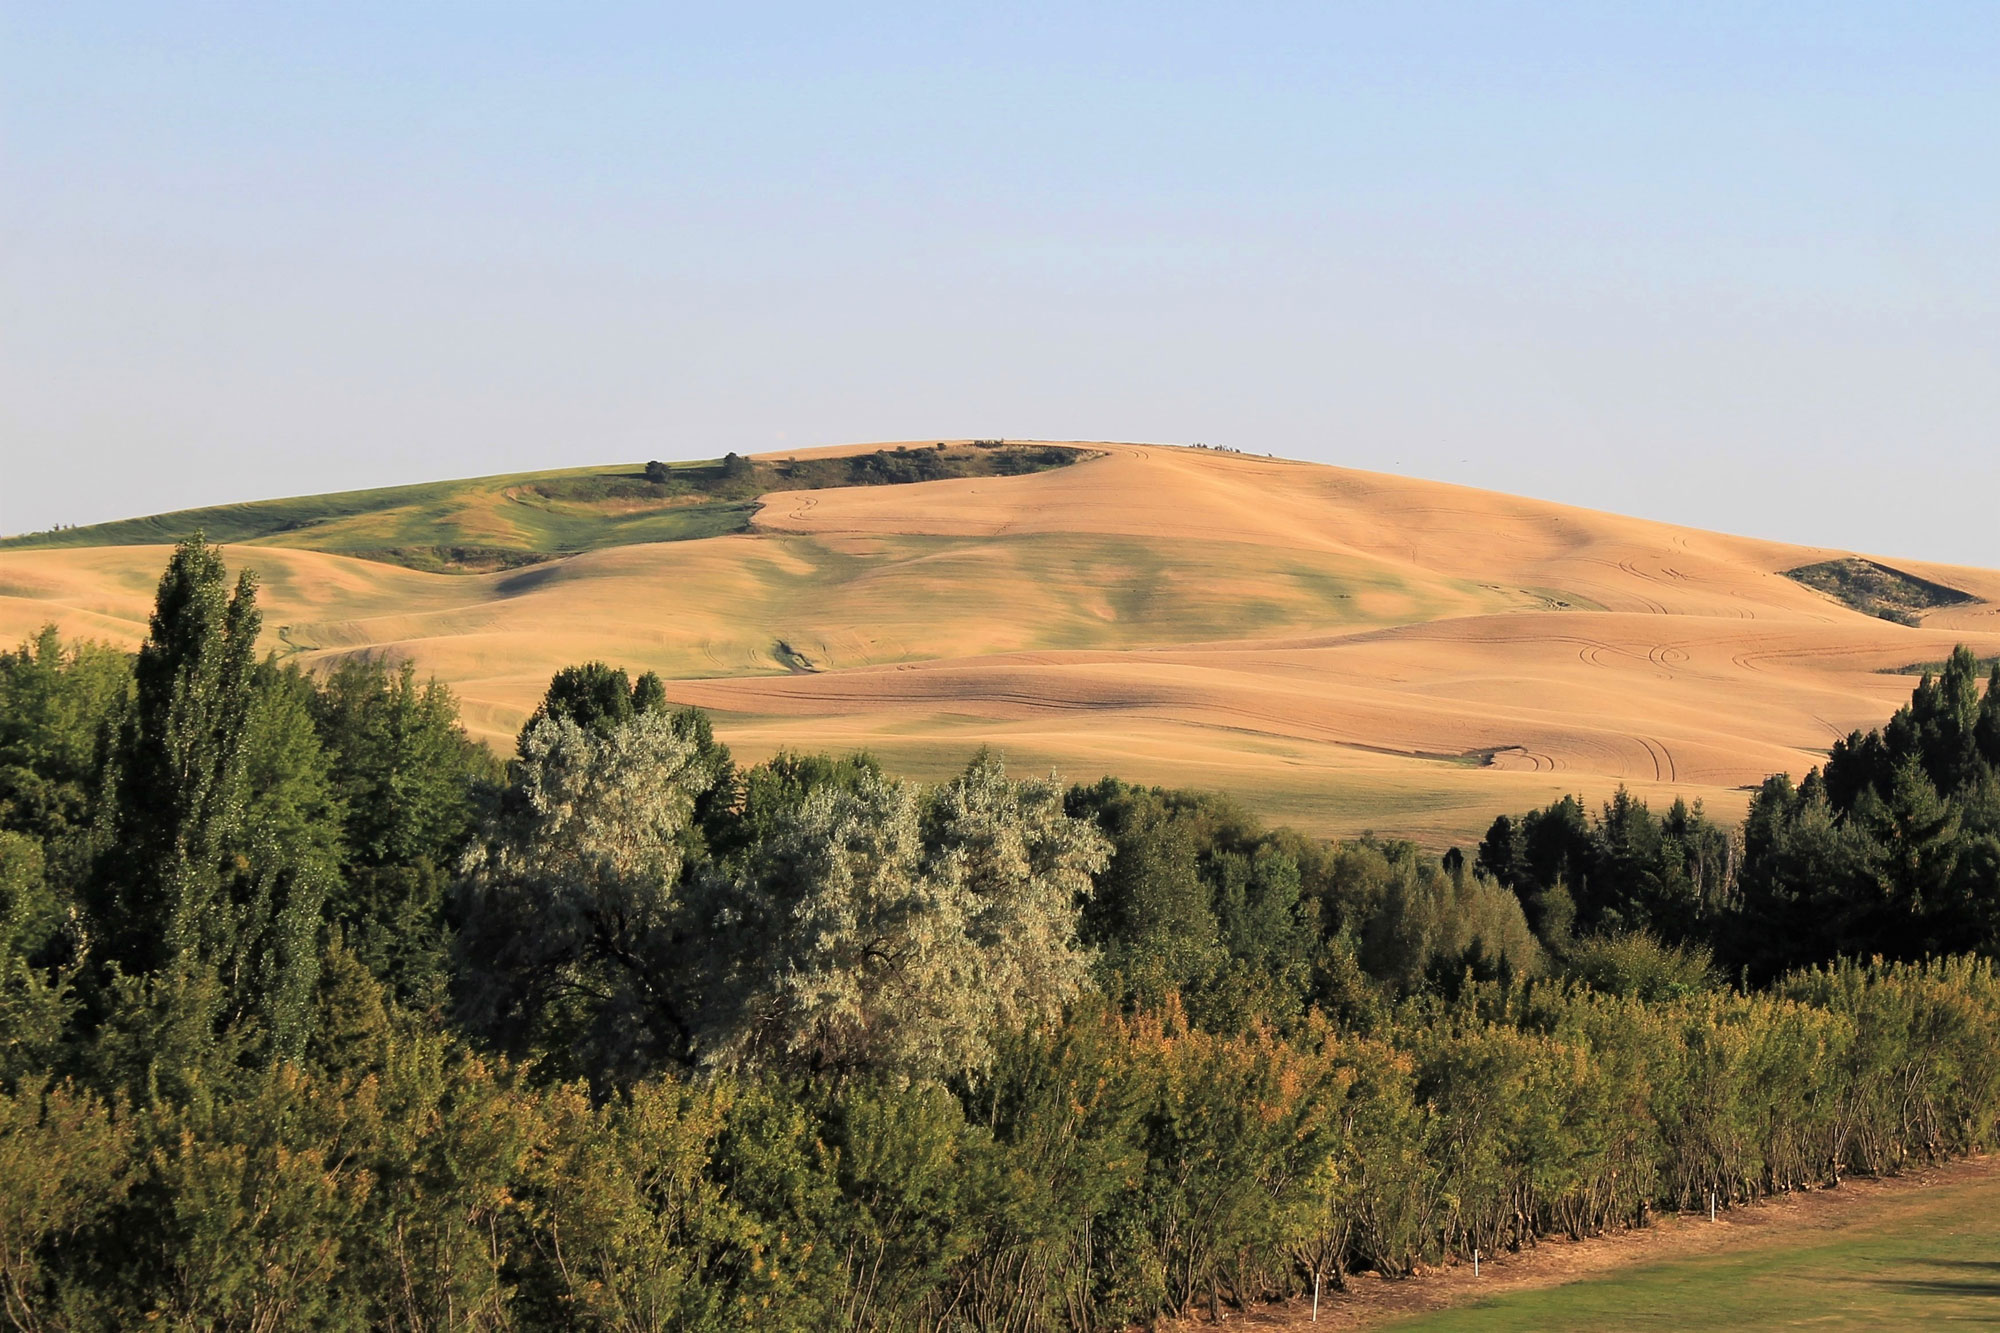 Photograph of the Palouse near Moscow, Idaho. The Palouse is a landscape of rolling hills formed by loess deposits. The photo shows a single gently-sloped hill covered with a mix of yellow and green grass; trees occur at the base of the hill. The surface of the hill is hummocky.